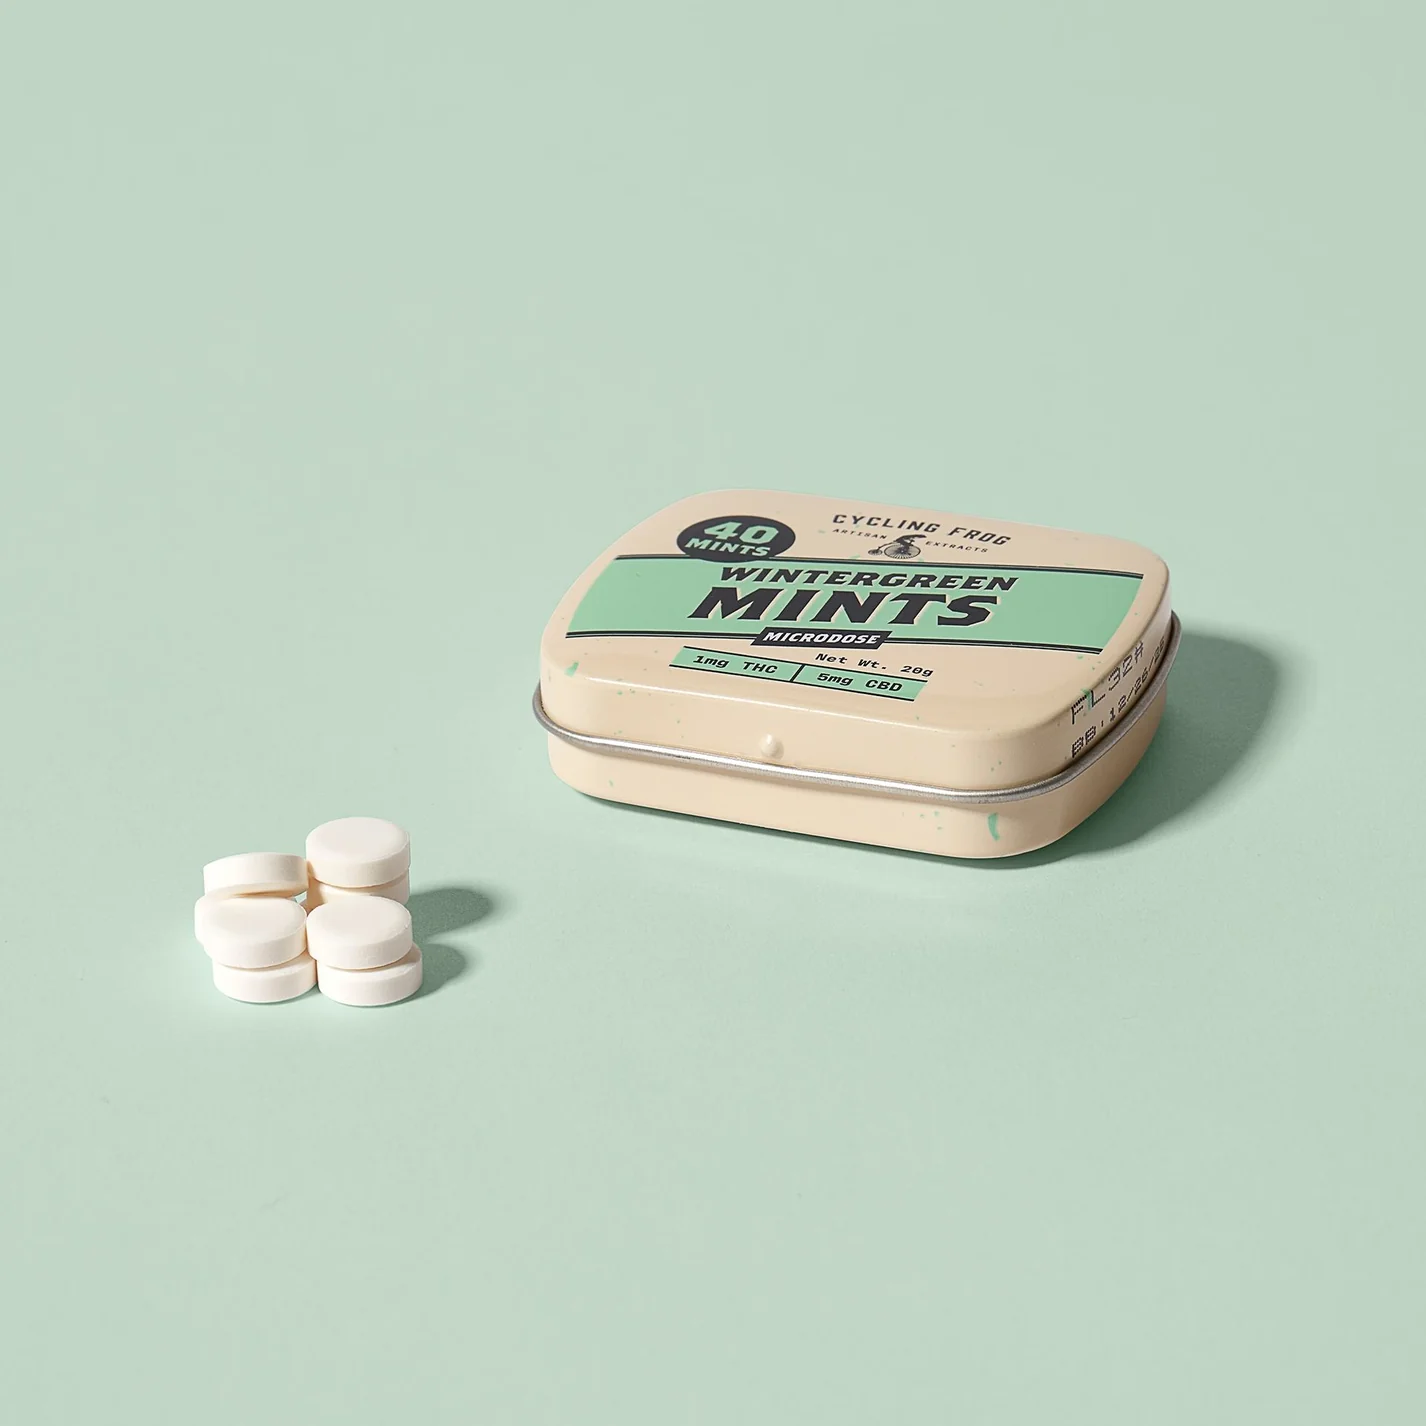 Cycling Frog's Wintergreen Mints contain 1mg THC and 5mg CBD. It's the perfect combo for microdosing cannabis.